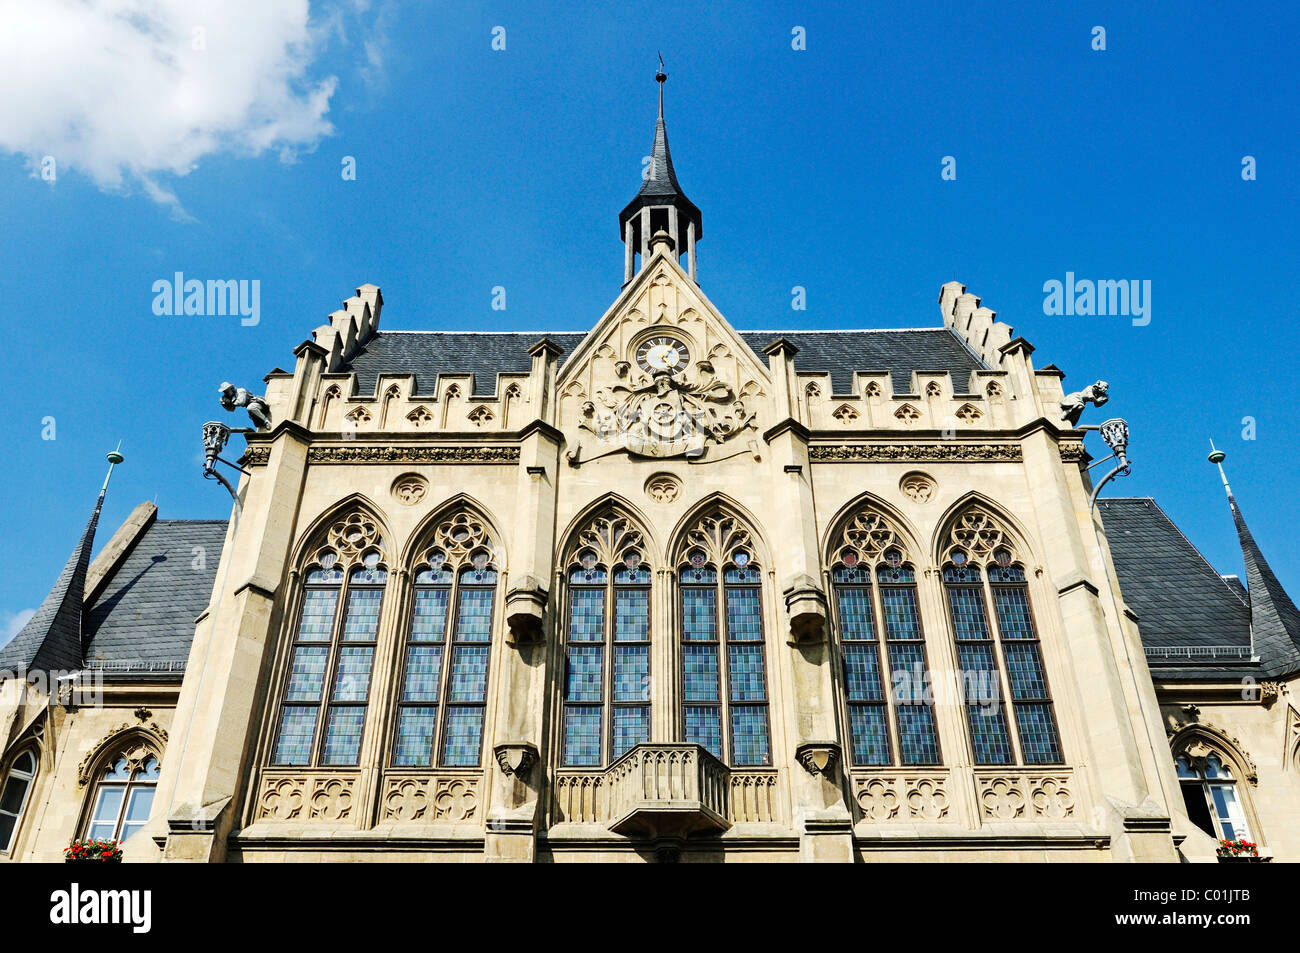 Erfurt city hall built in the Gothic Revival or Neo-Gothic style, Fischmarkt fish market, Erfurt, Thuringia, Germany, Europe Stock Photo